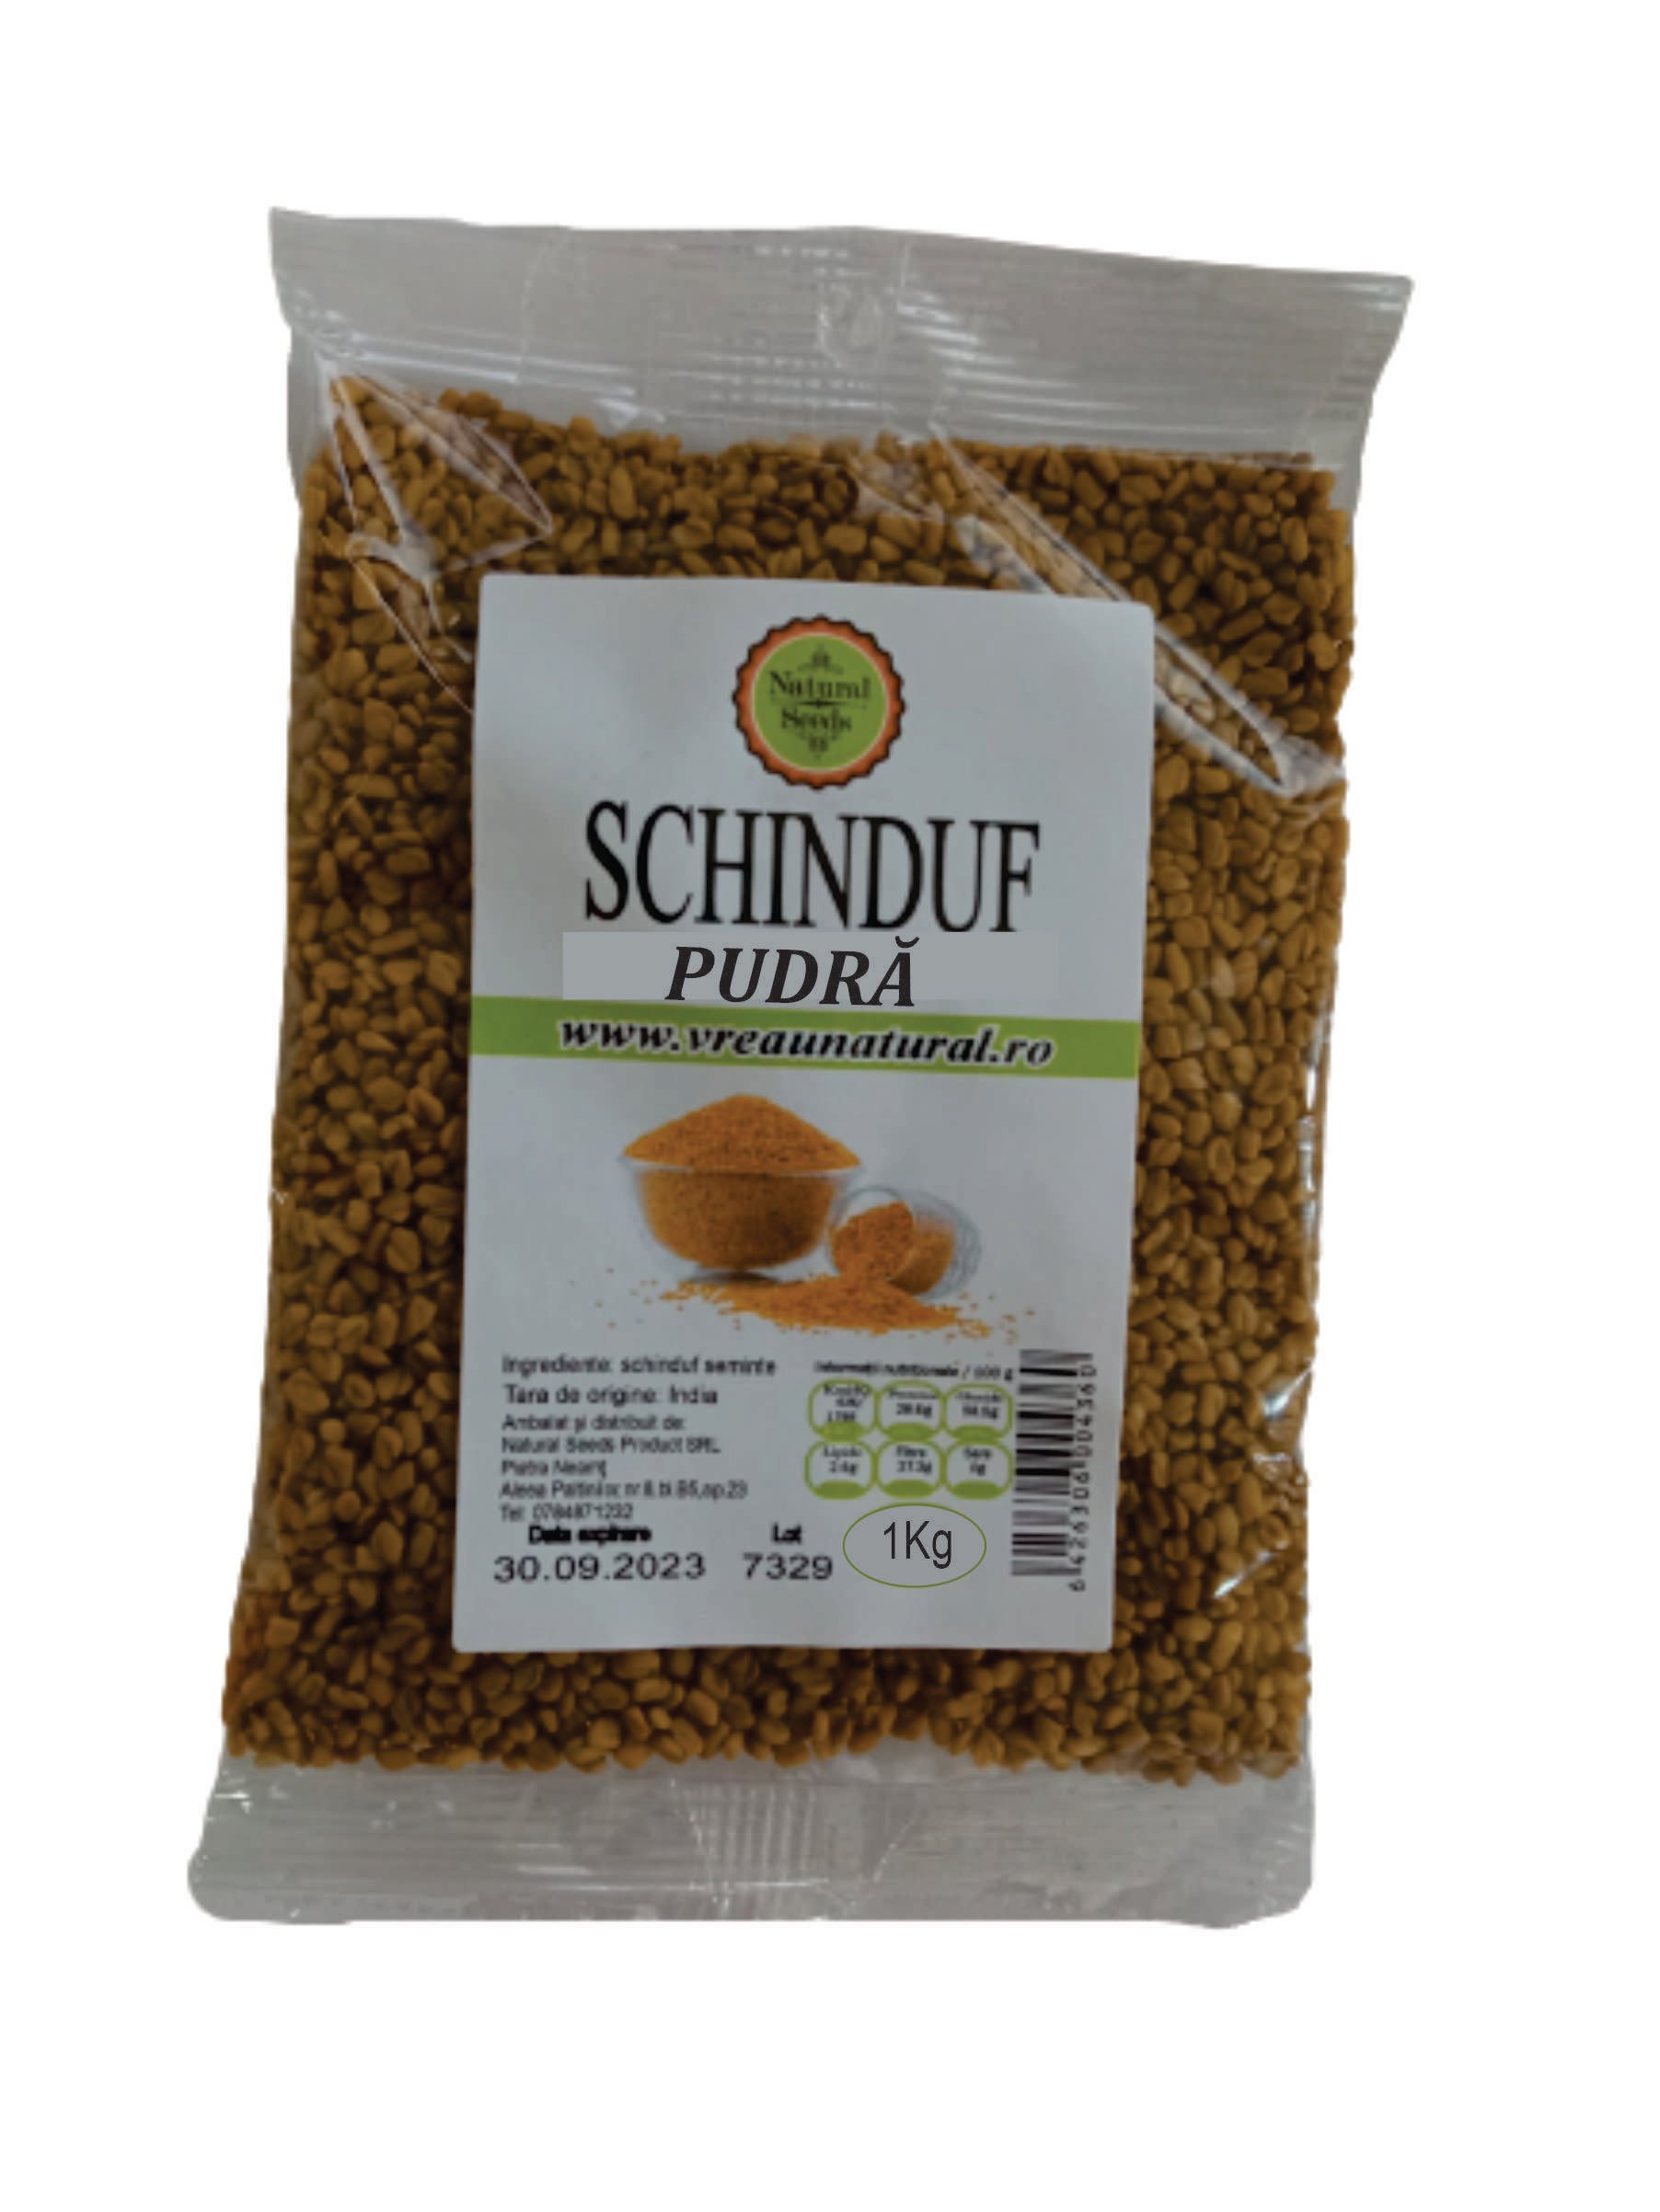 Schinduf pudra, Natural Seeds Product